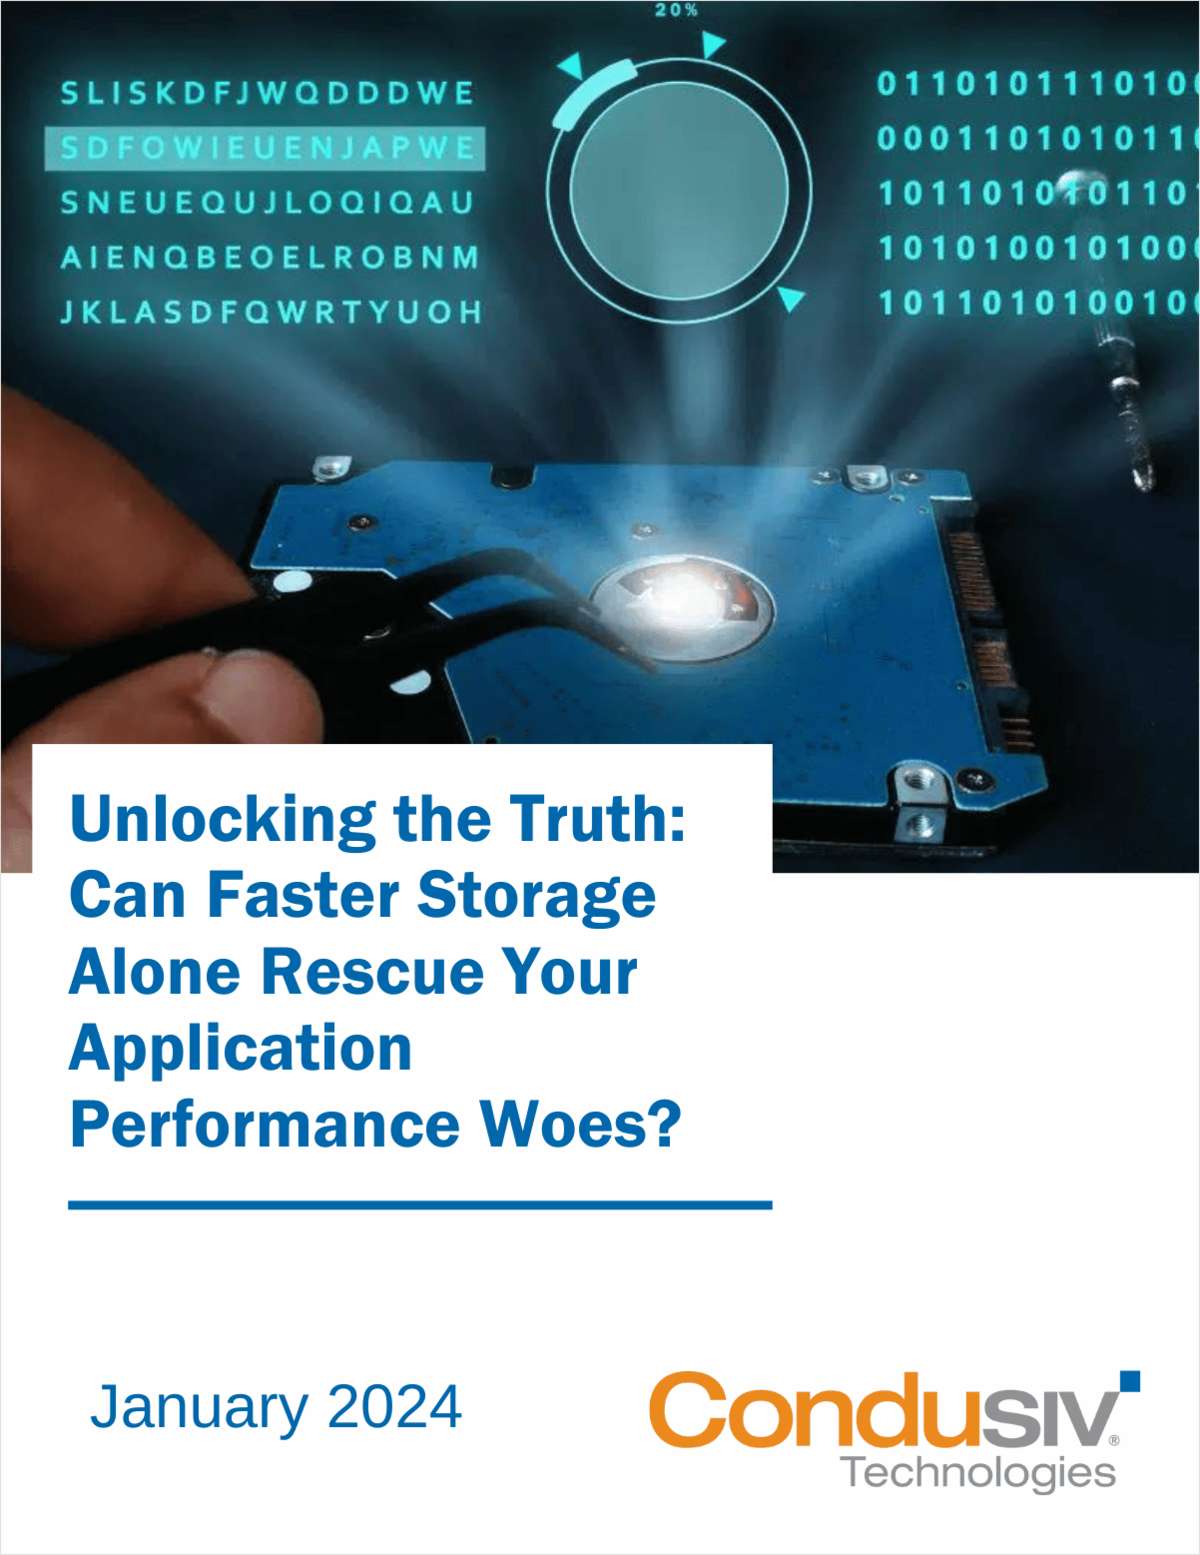 Unlocking the Truth: Can Faster Storage Alone Rescue Your Application Performance Woes?